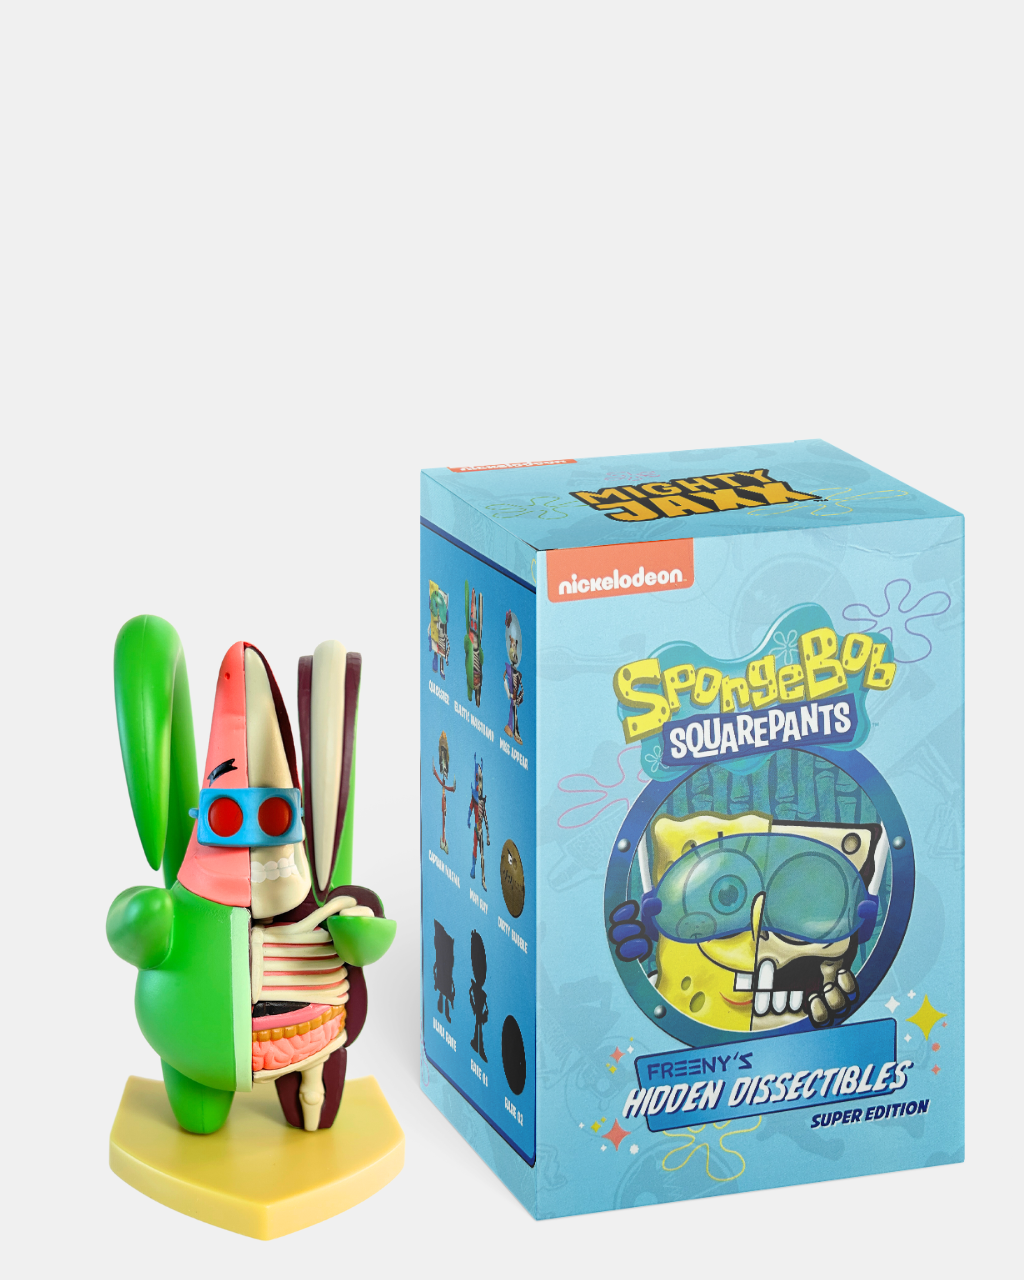 Freeny's Hidden Dissectible: Spongebob Squarepants Series 04 (Super  Edition) - Blind Box - Collect & Display - Largest Collection of Blind Boxes  in the UK – Collect and Display